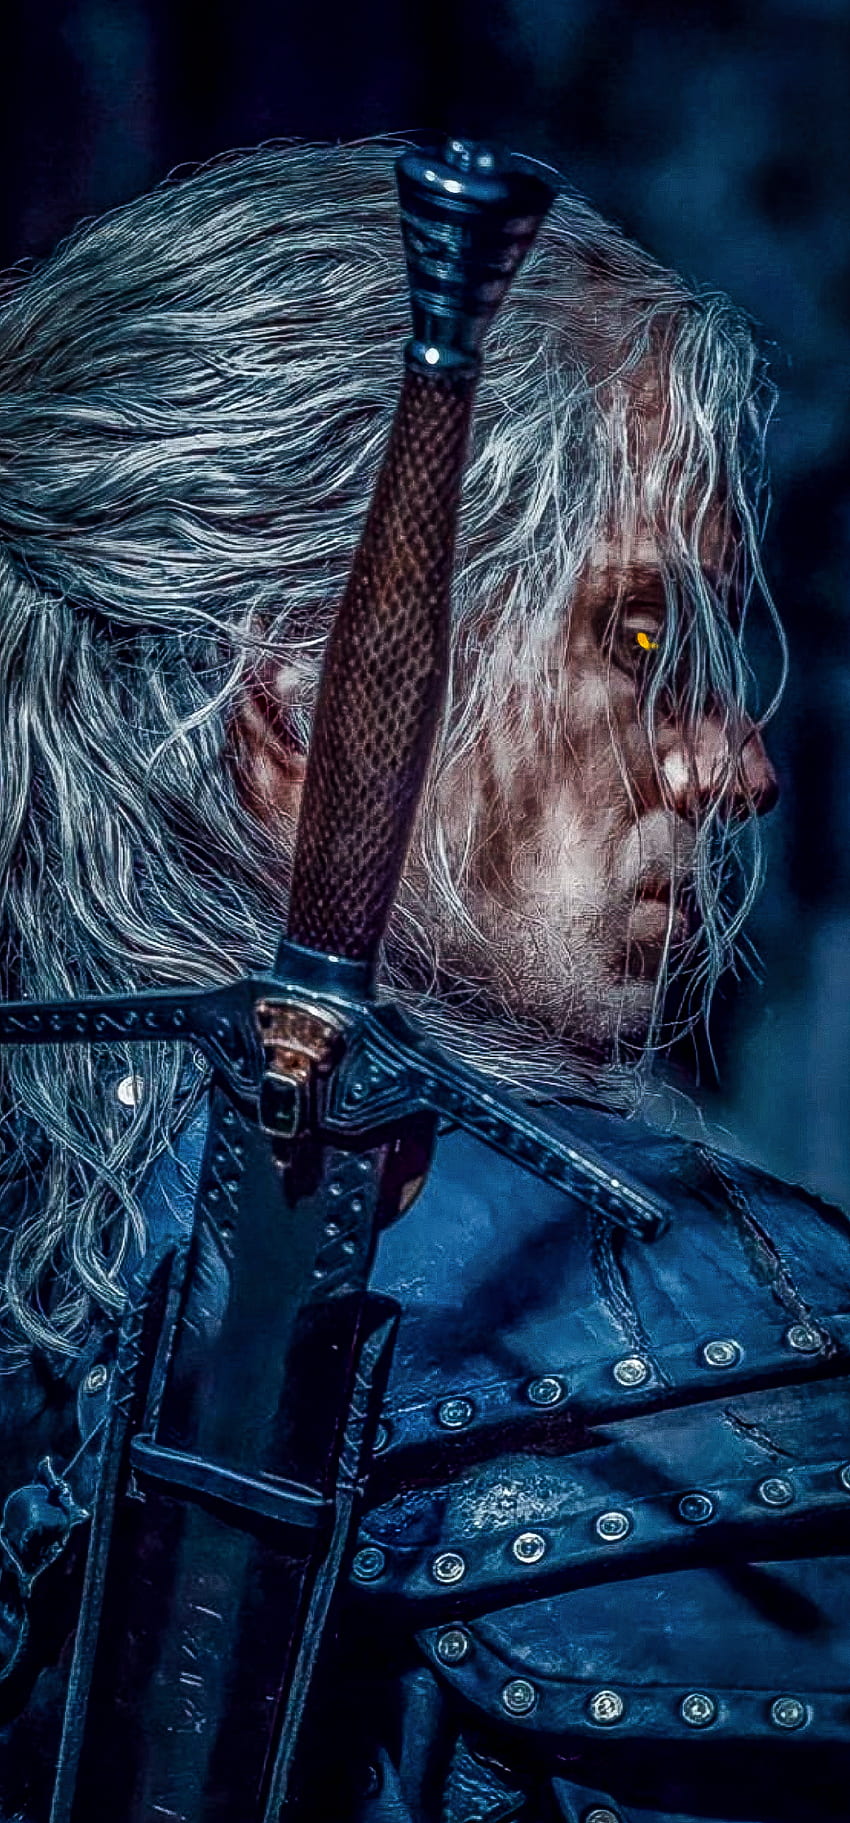 THE WITCHER, warrior, winter, geralt of rivia, the witcher netflix, yennefer, eyes, people, the witcher 3, the witcher season 2, ciri, dark, games, henry cavill, knight, superman, graphy, the witcher 3 perburuan liar wallpaper ponsel HD